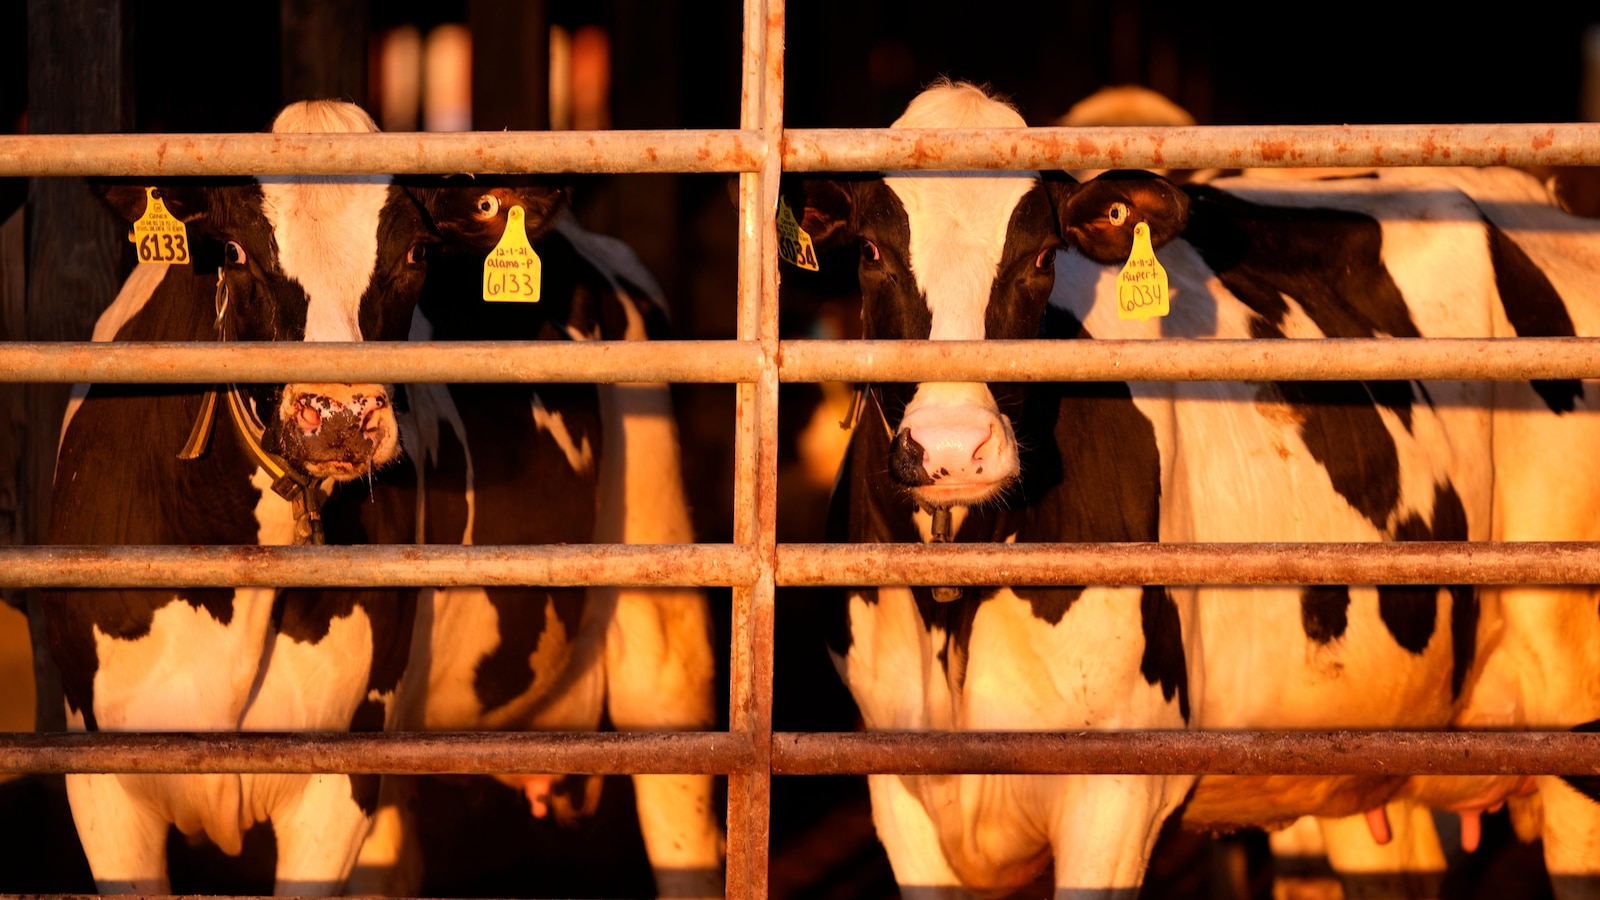 The US is pledging money and other aid to track and contain bird flu on dairy farms